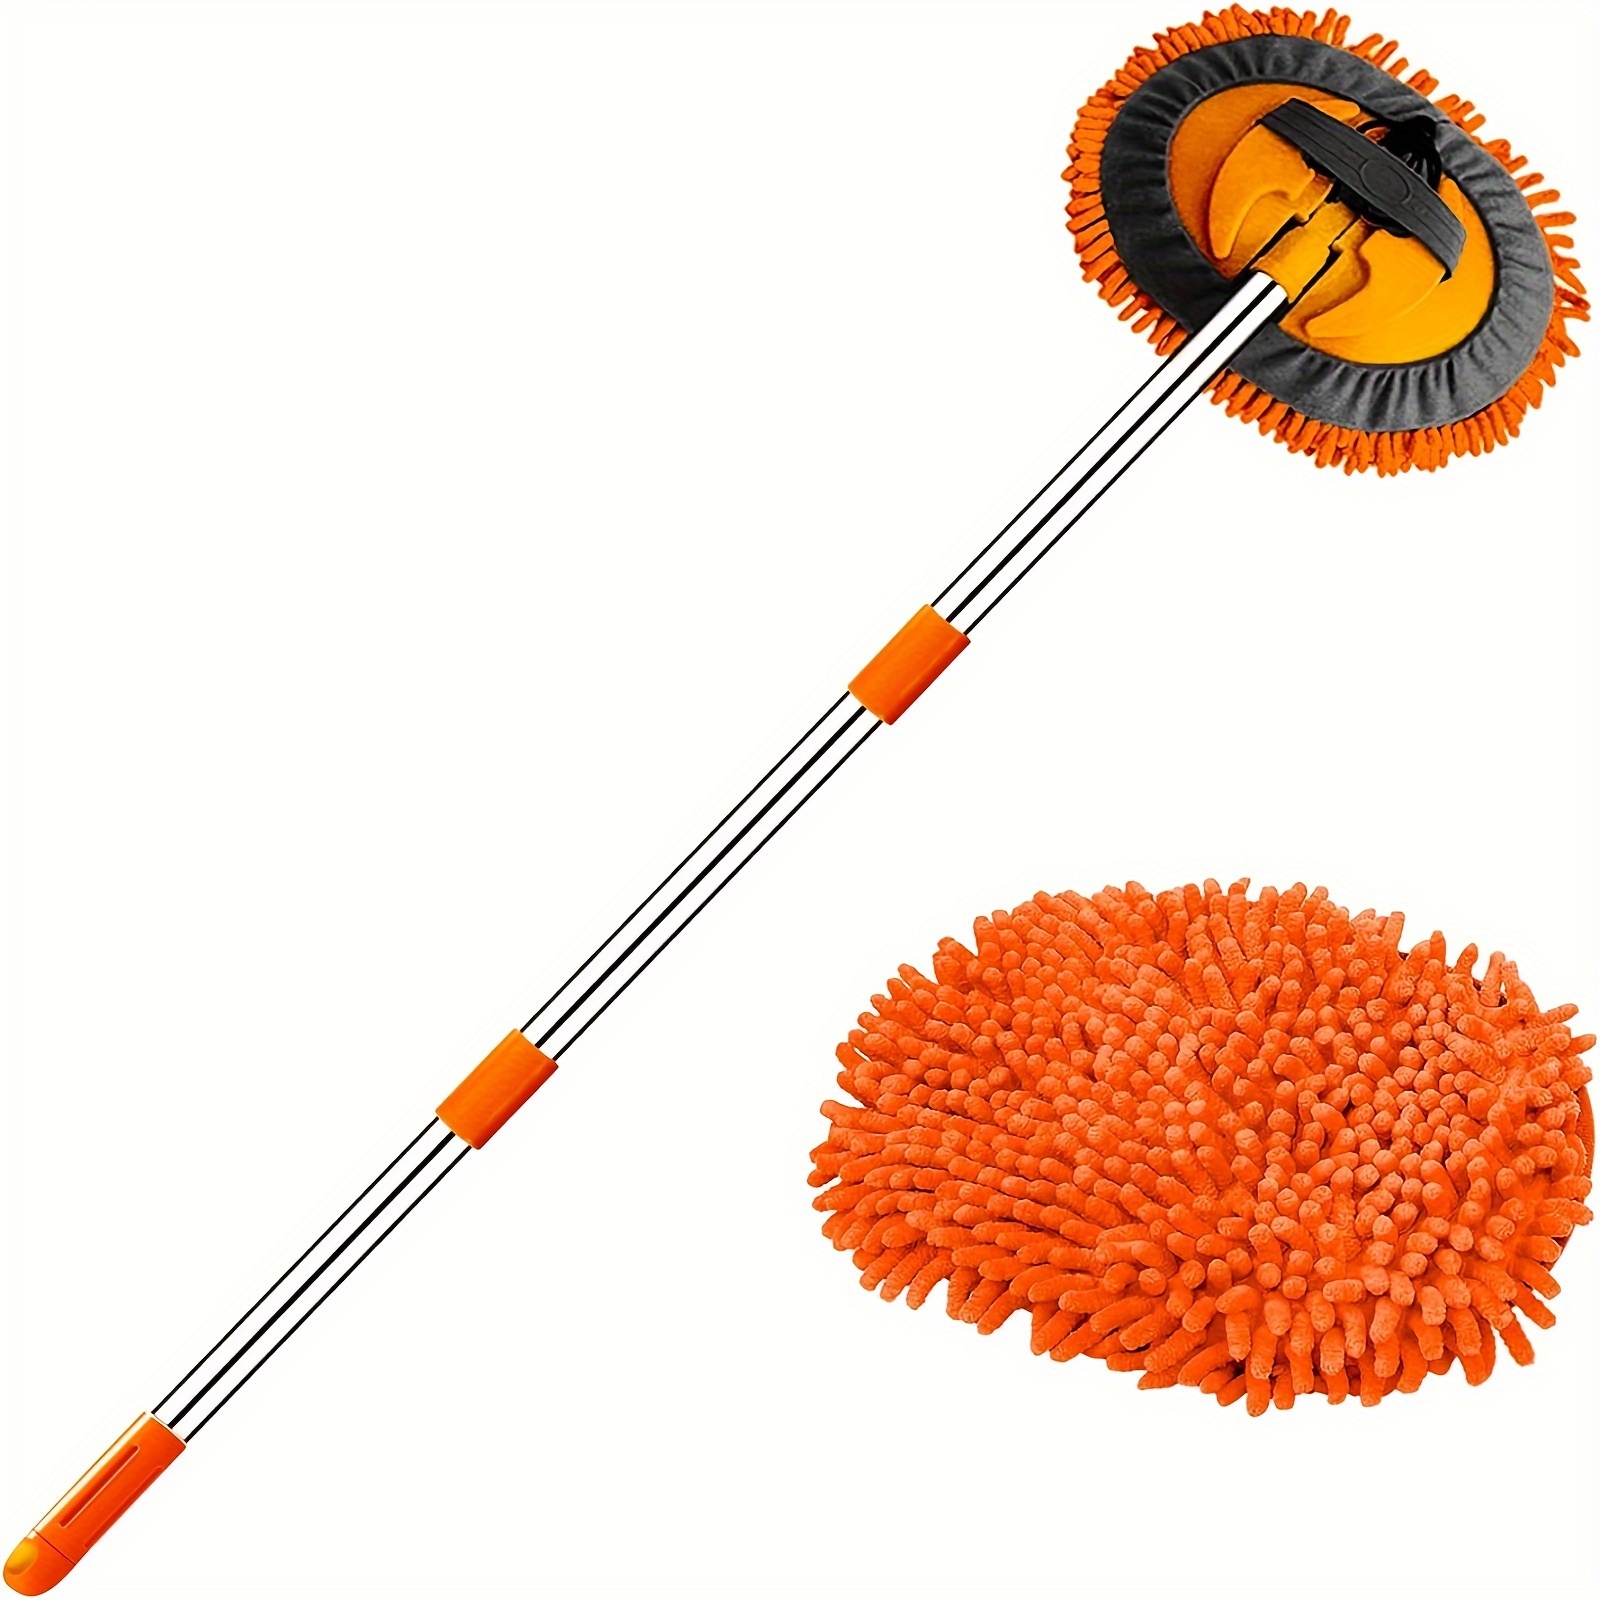 

48" Orange Microfiber Car Wash Mop With Long Handle - 2-in-1 Chenille Sponge Duster For Detailing Cars, Trucks, Suvs, Rvs, Trailers, Boats - Scratch-free Cleaning Tool